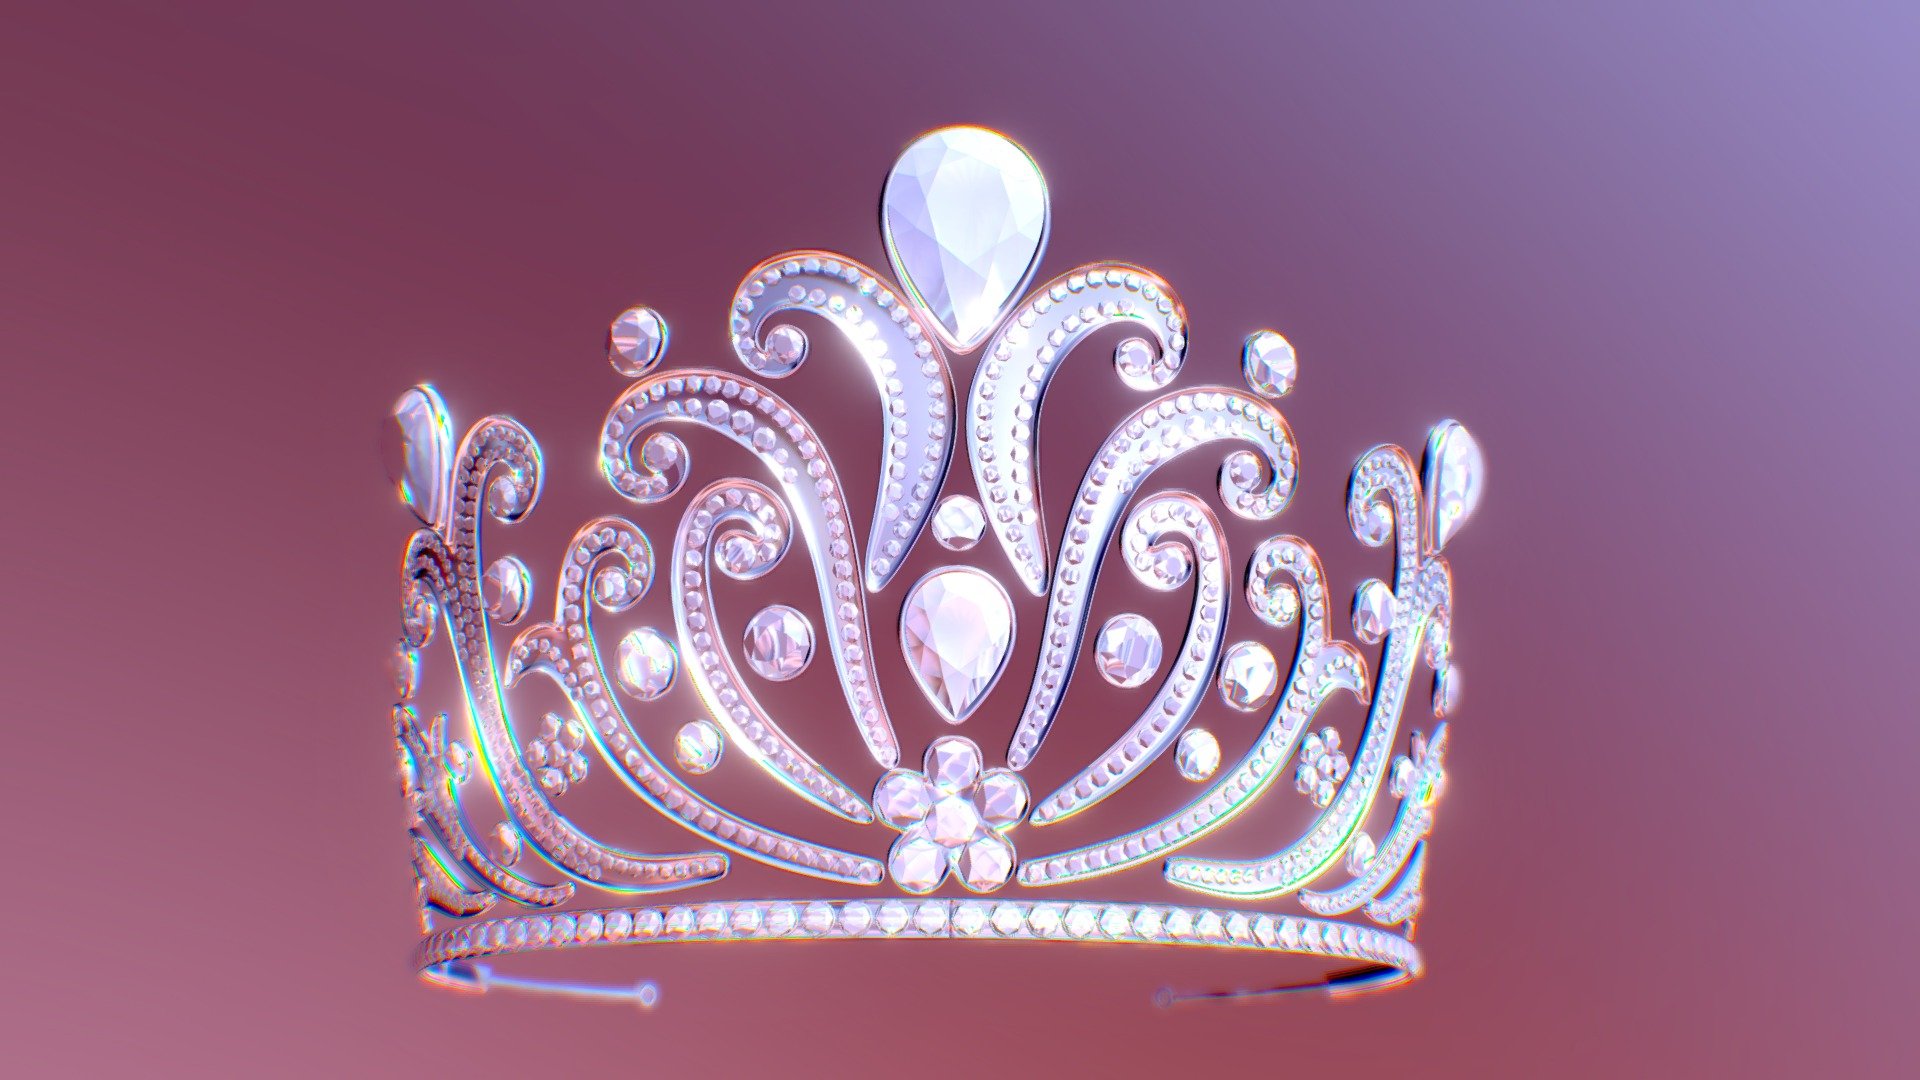 Tiara 3D object model in .obj format. Generic materials are included in .mtl file. For best results tweak your own render engine and materials.
You also might be interested in other my tiara and crown models: https://sketchfab.com/sk-pro/collections/tiaras , https://sketchfab.com/sk-pro/collections/crowns .
Best Regards 3d model